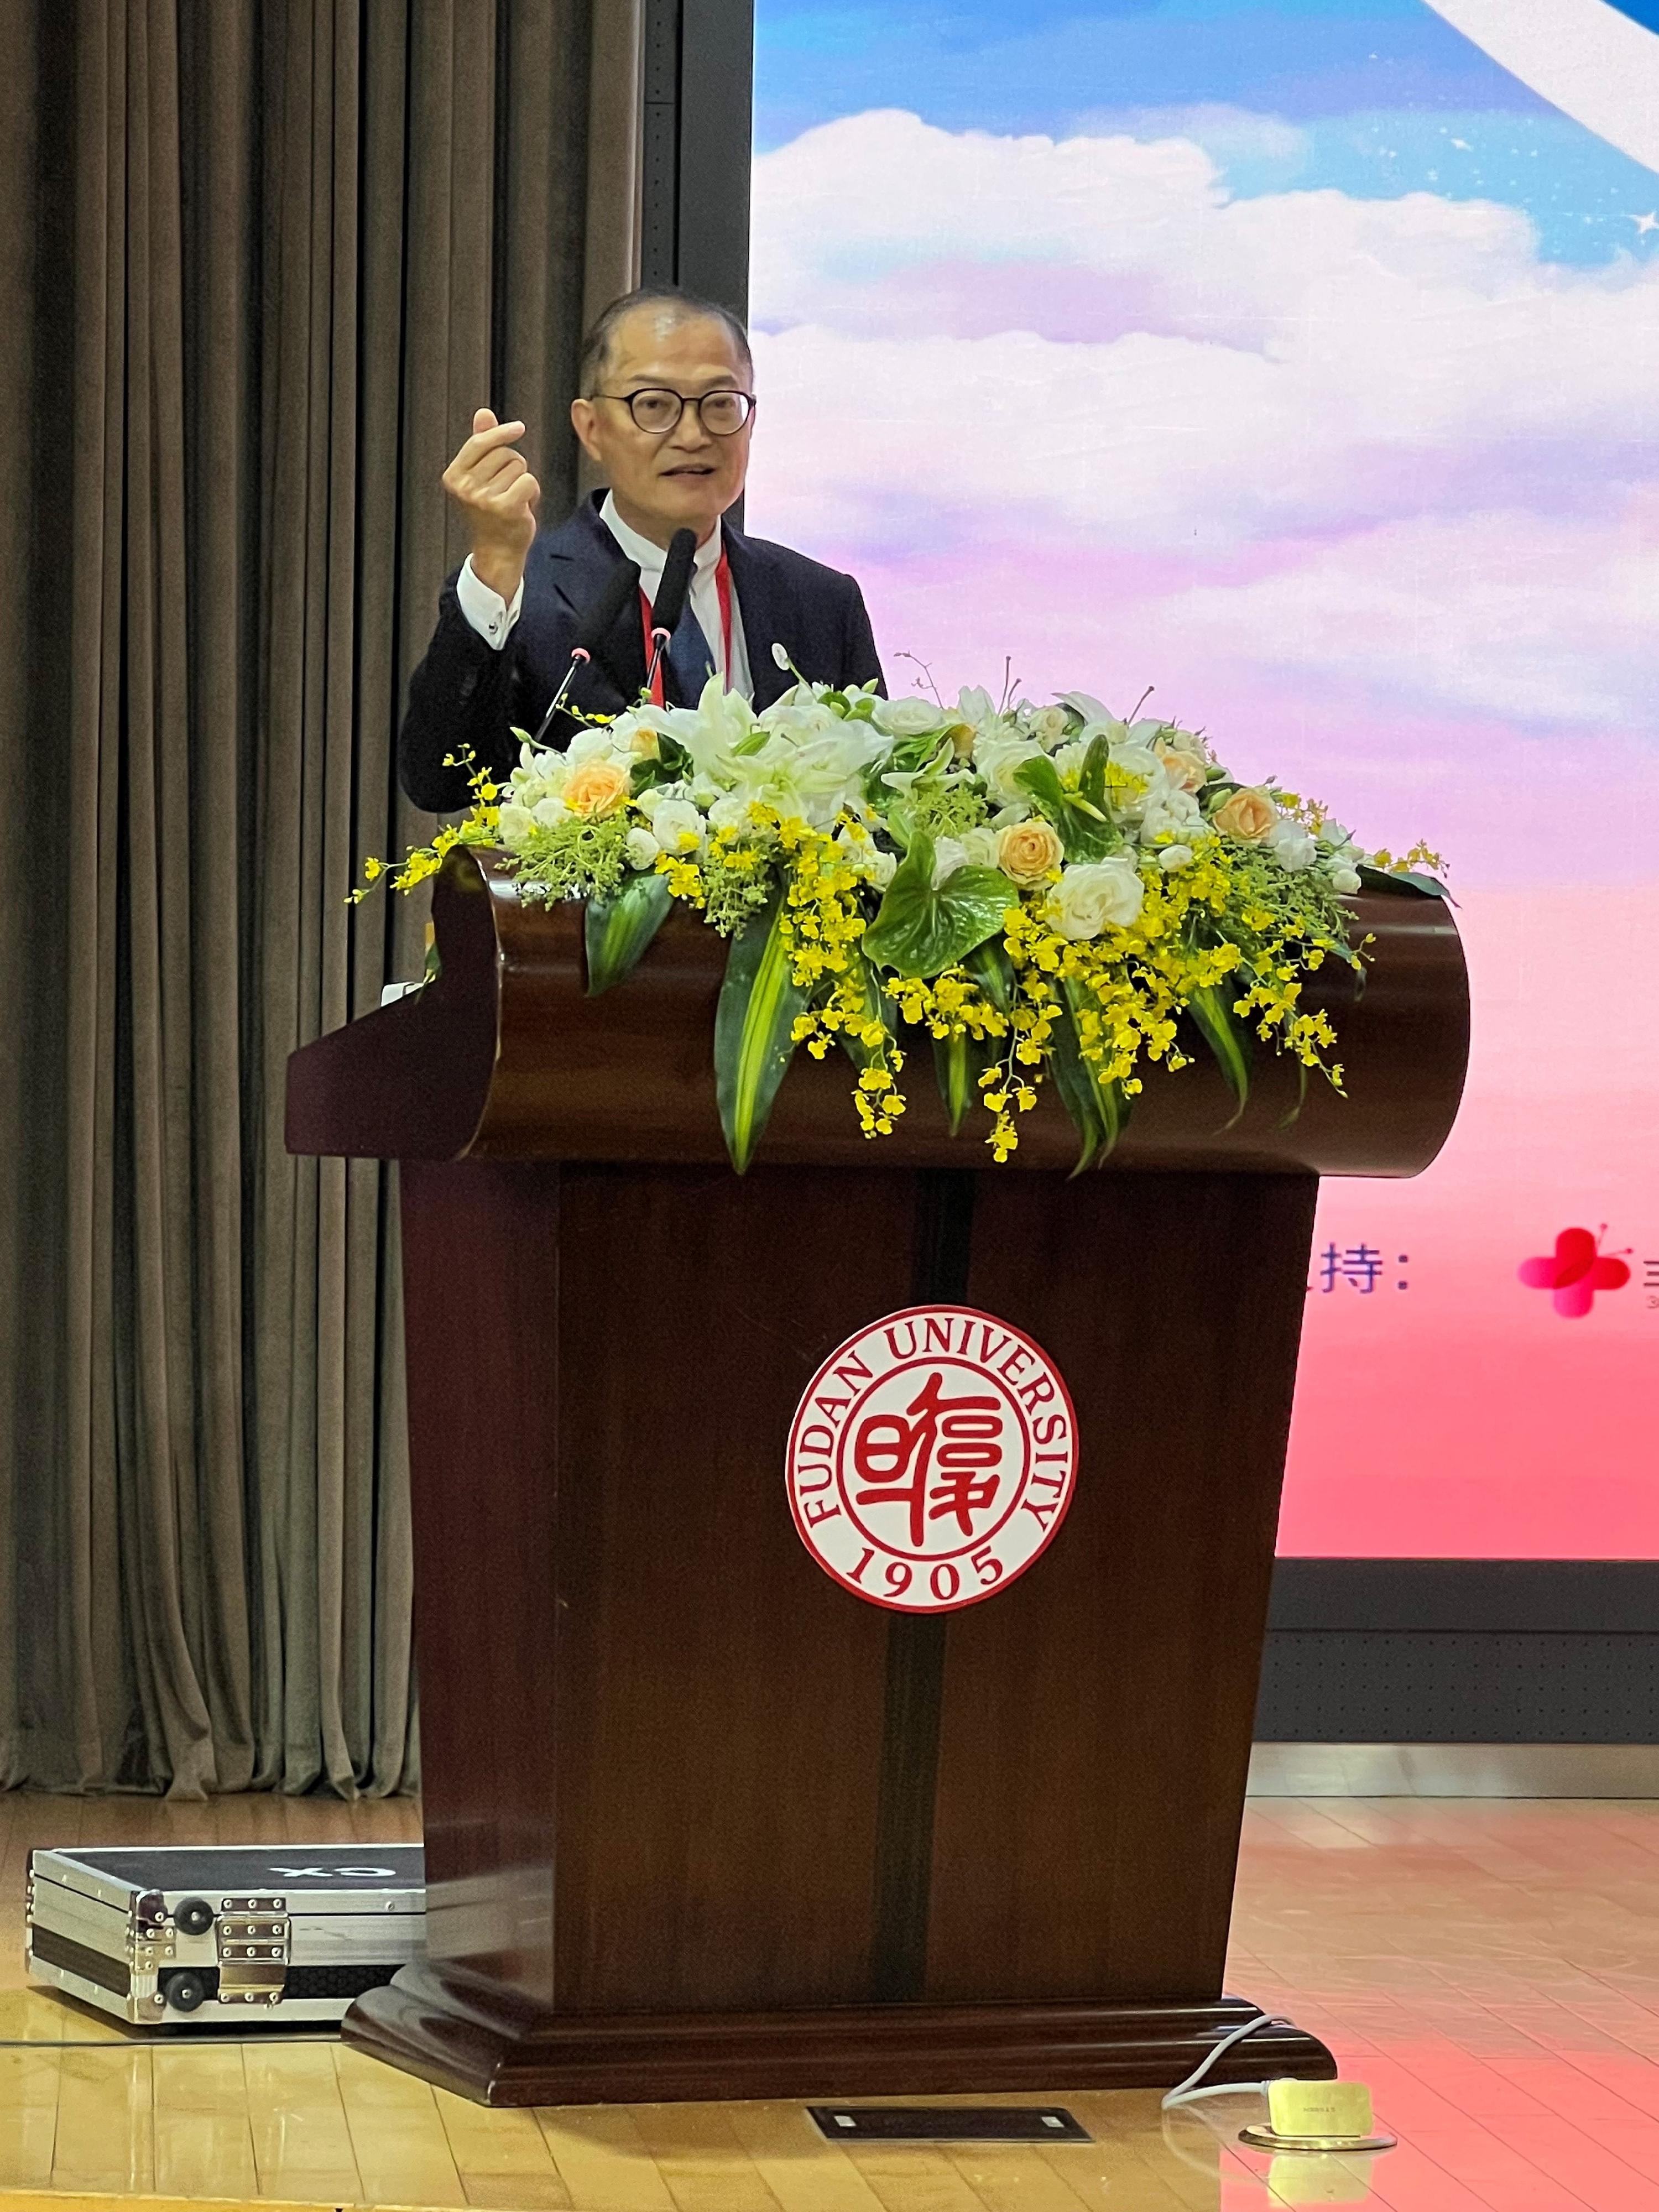 The Secretary for Health, Professor Lo Chung-mau, delivers a speech at the China Organ Donation Day event jointly organised by the China Organ Transplantation Development Foundation and the China Organ Donation Administrative Center in Shanghai today (June 11).